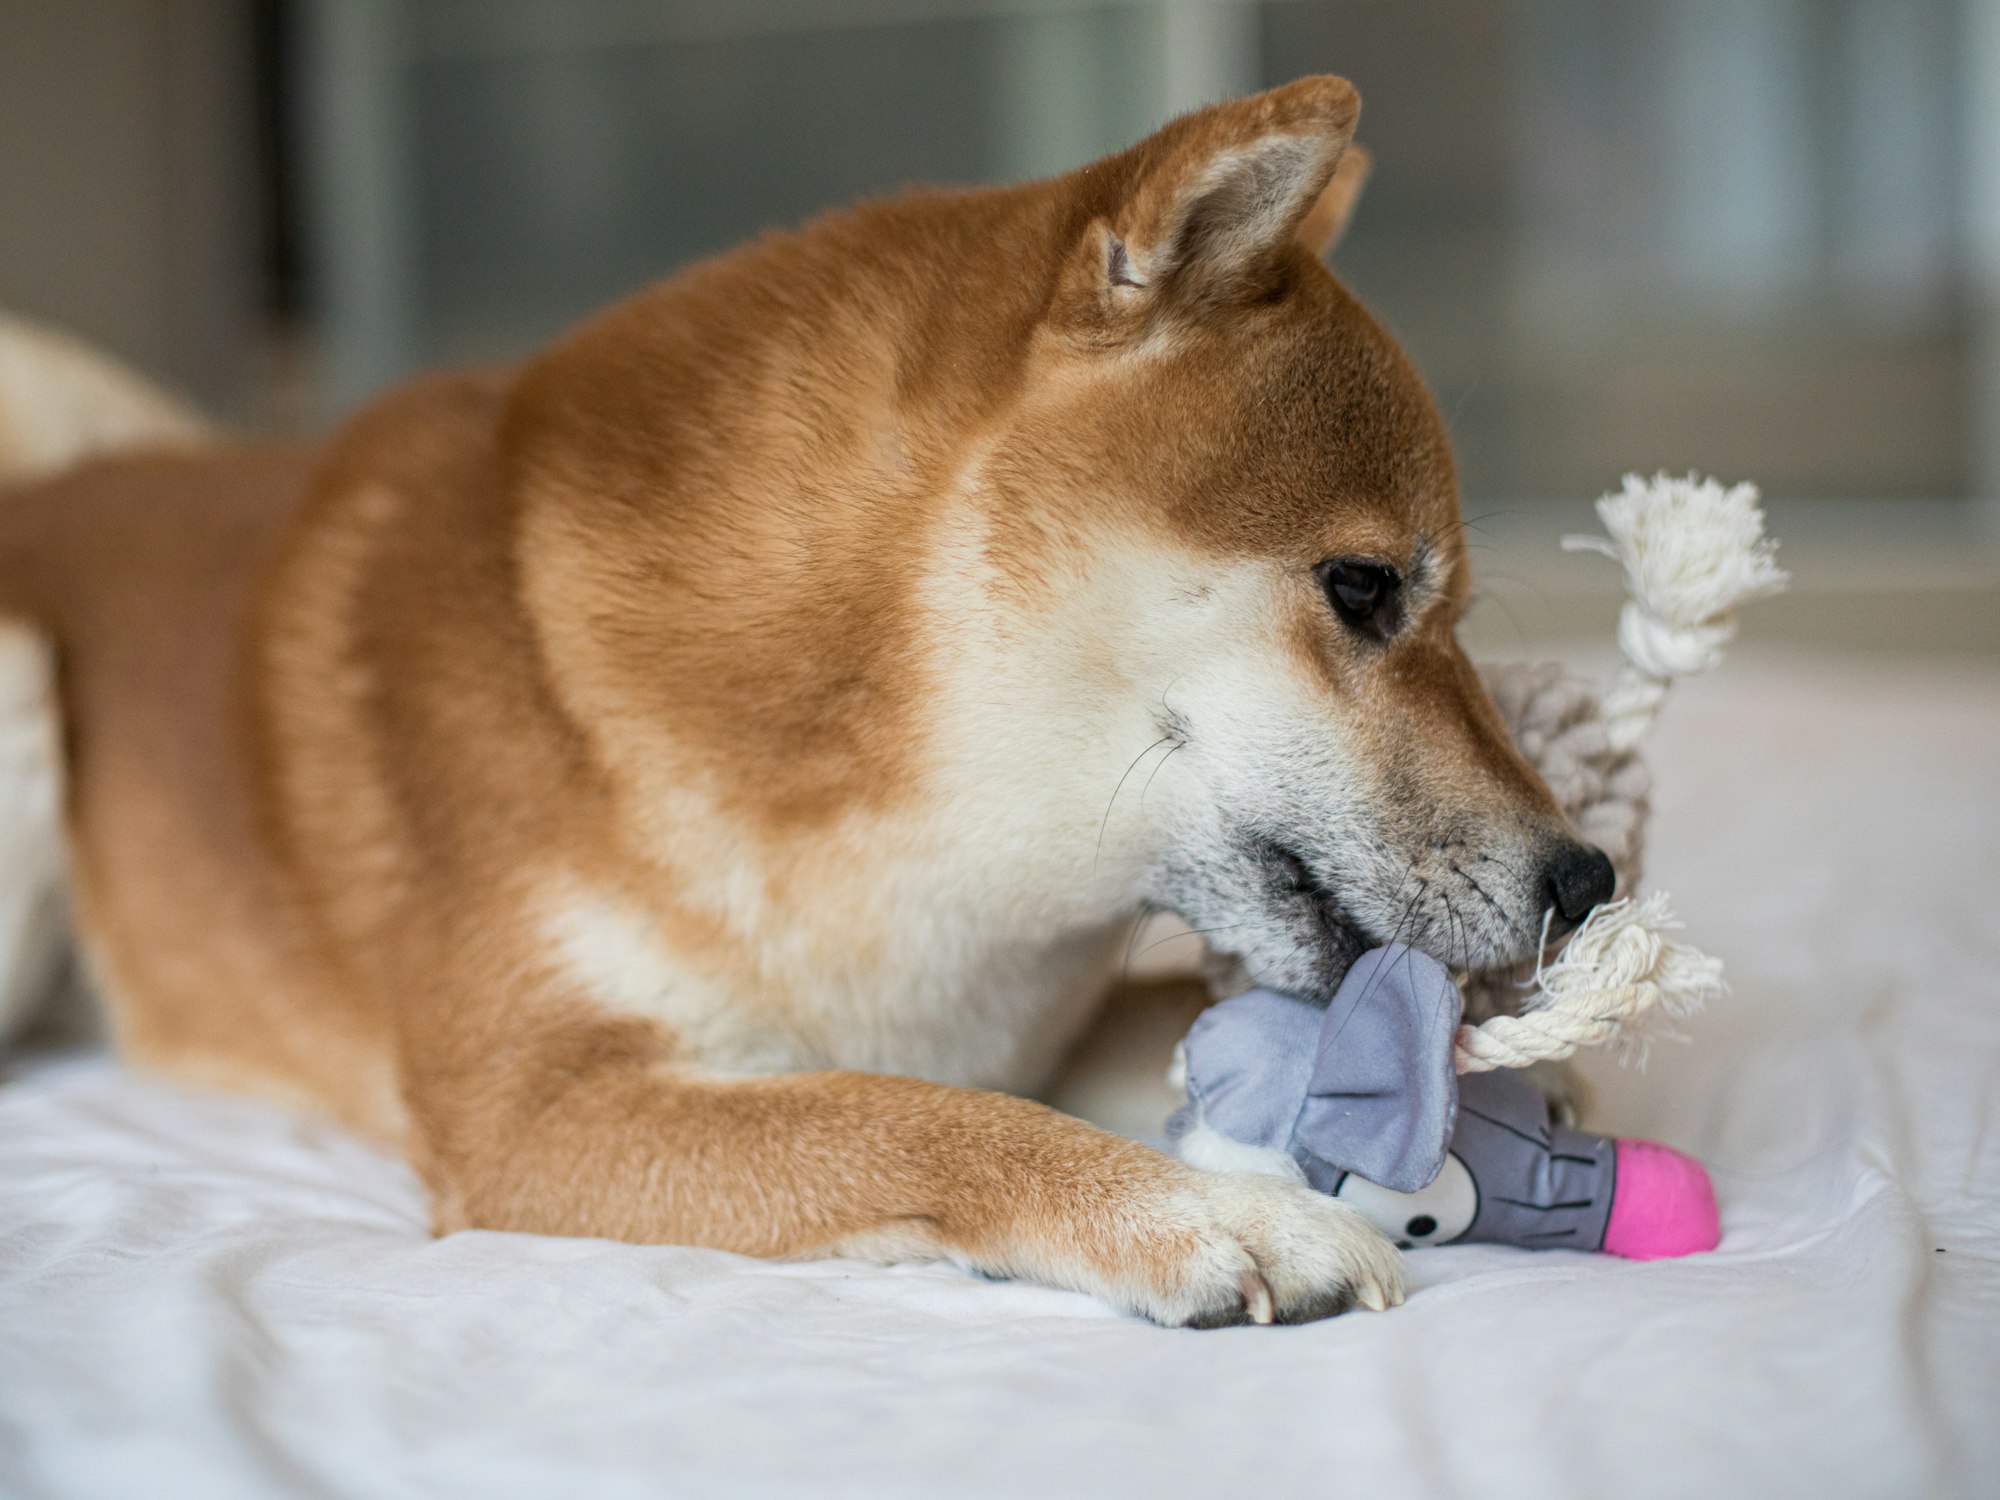 Dog is playing with a pet fluffy toy for animals